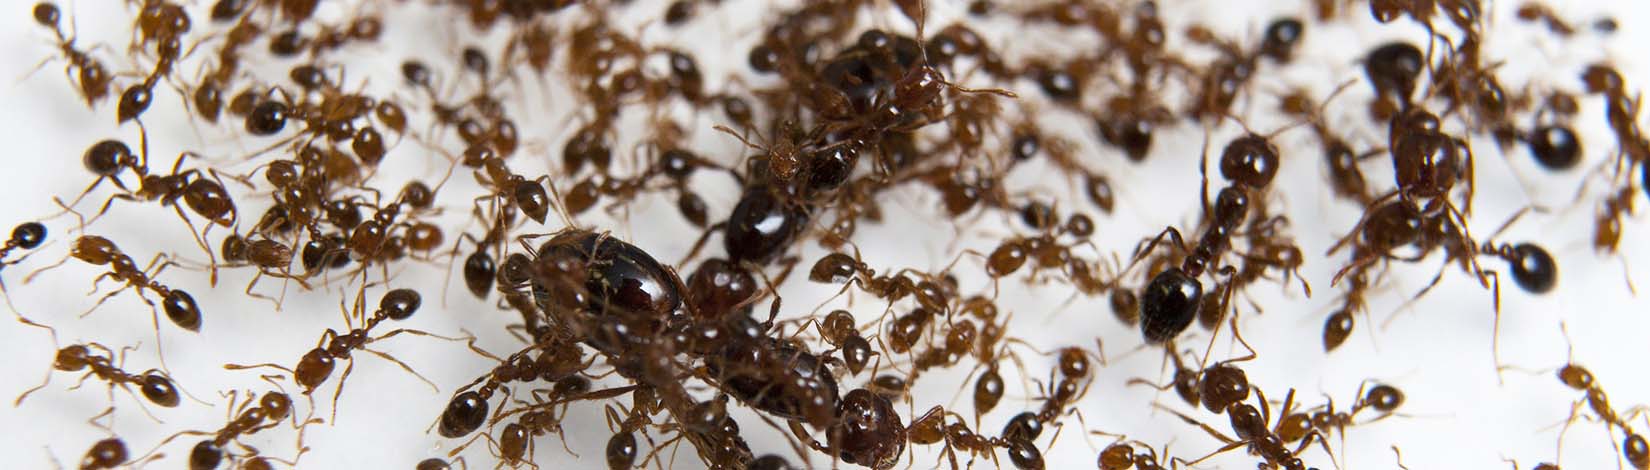 Fire ants in Florida